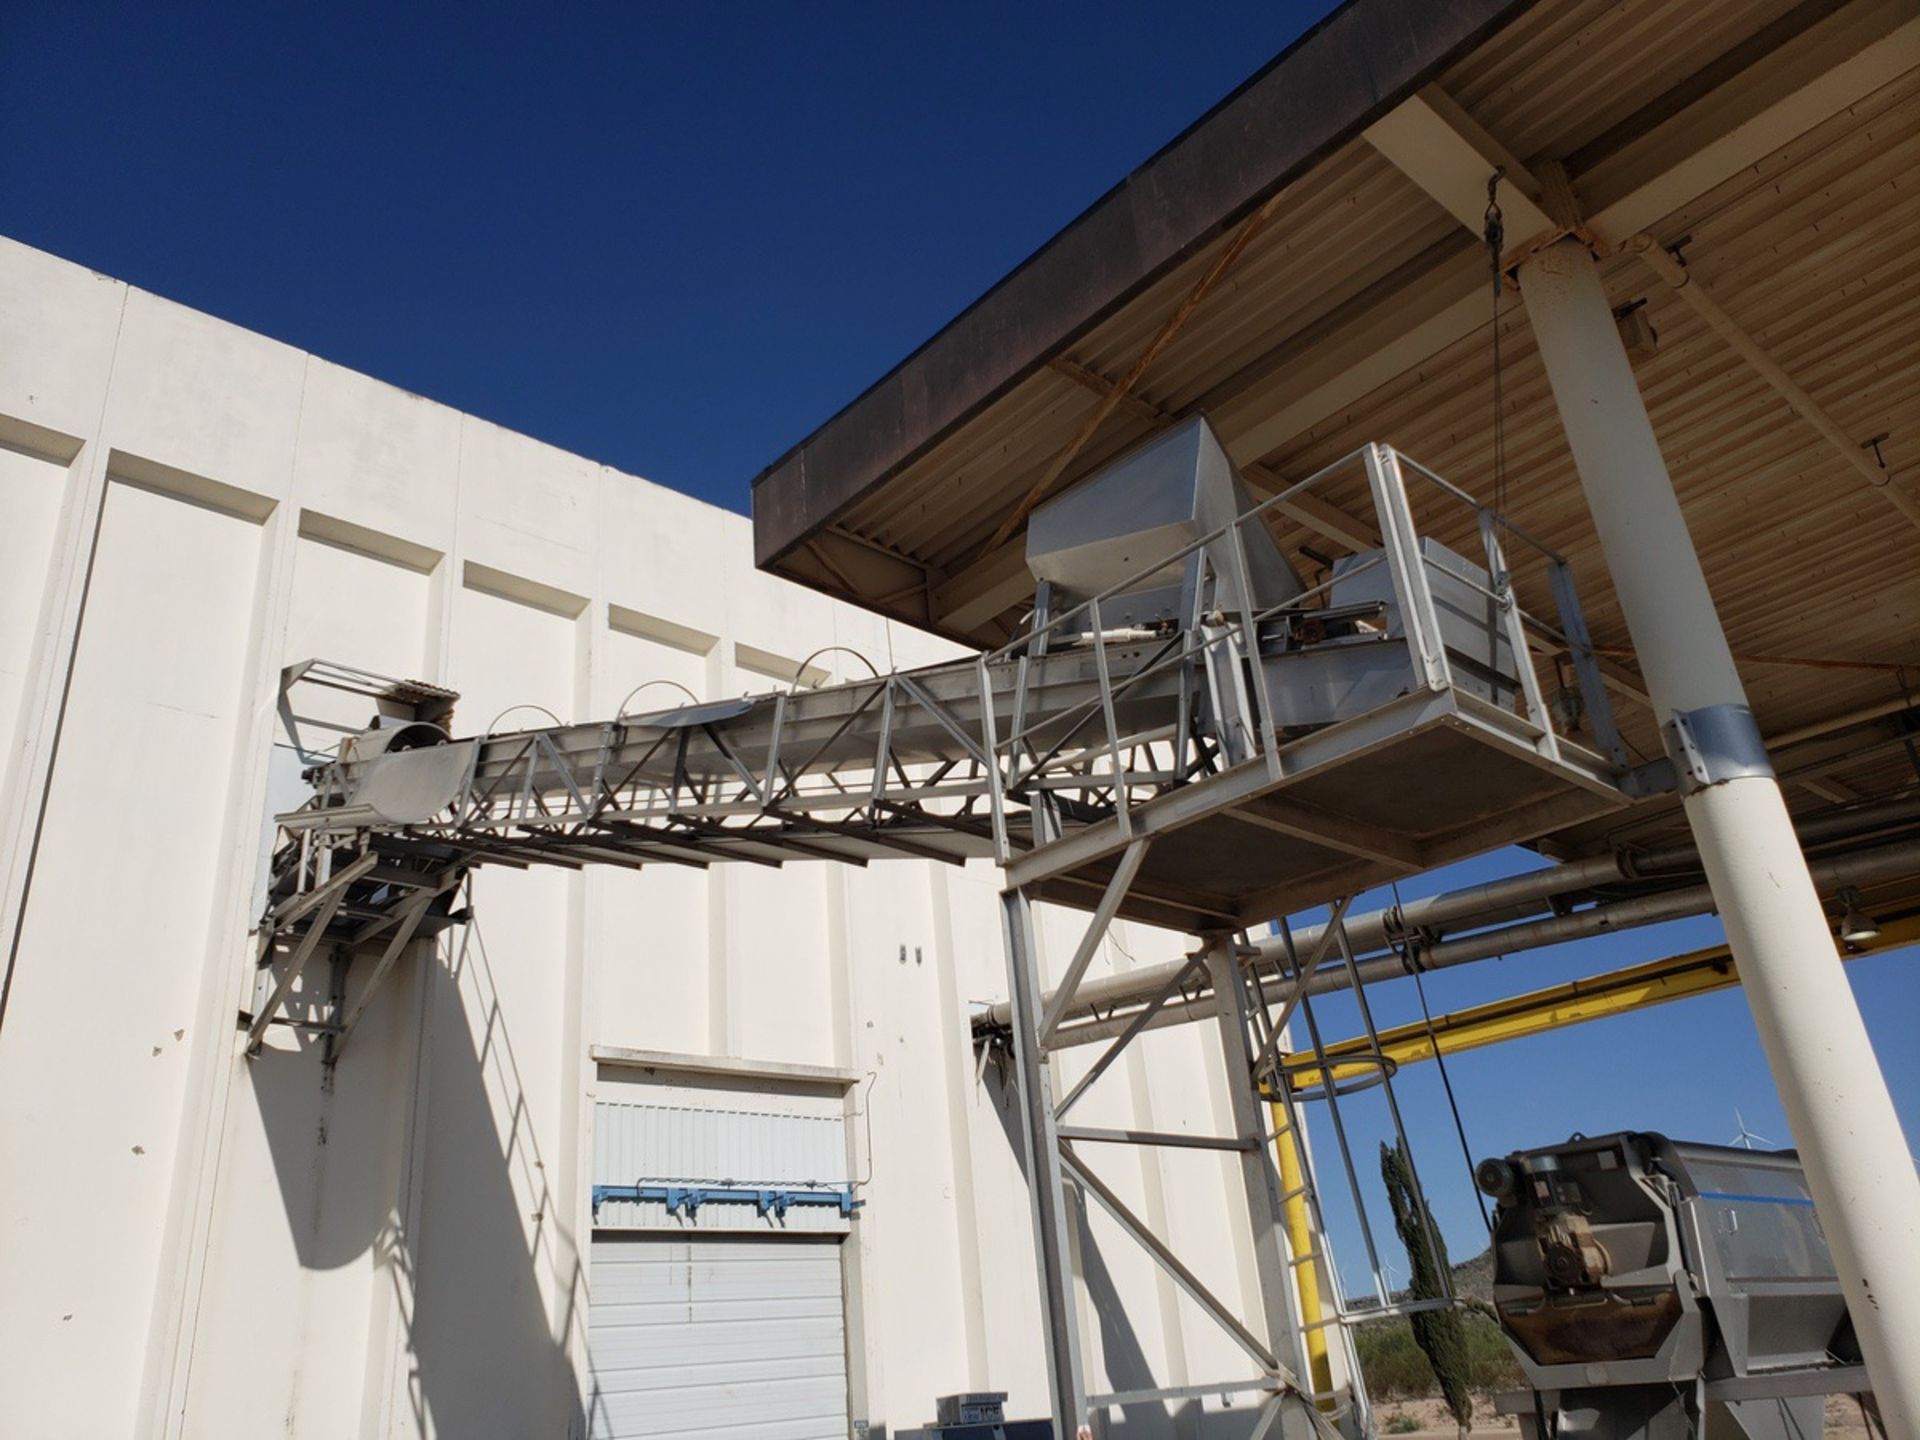 24" X 36' Overhead Pleated Belt Delivery Conveyor | Rig Fee $1500